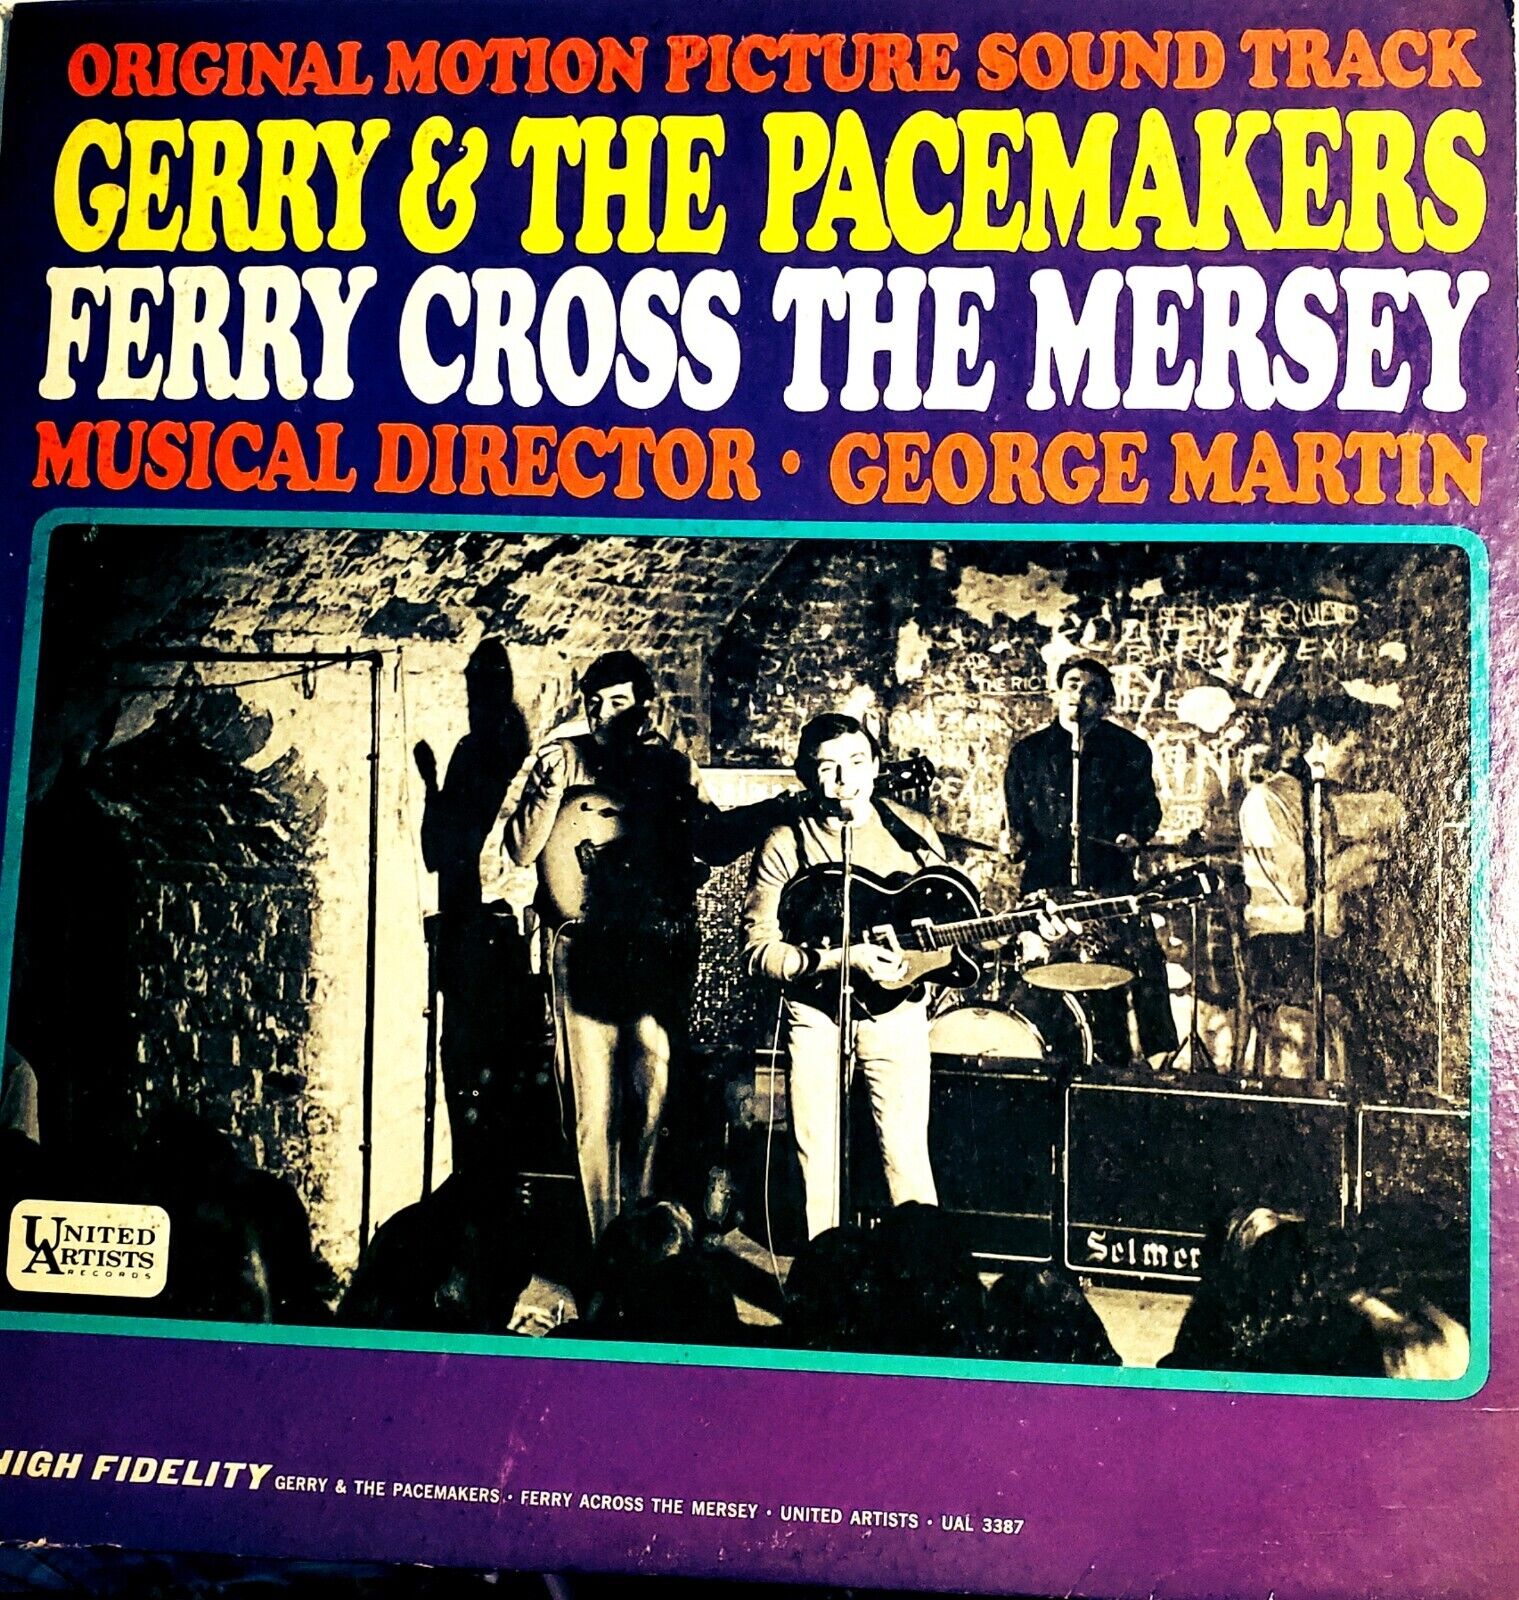 Gerry & The Pacemakers-Ferry Cross the Mersey (Soundtrack) LP, 1965 UA EXC.+